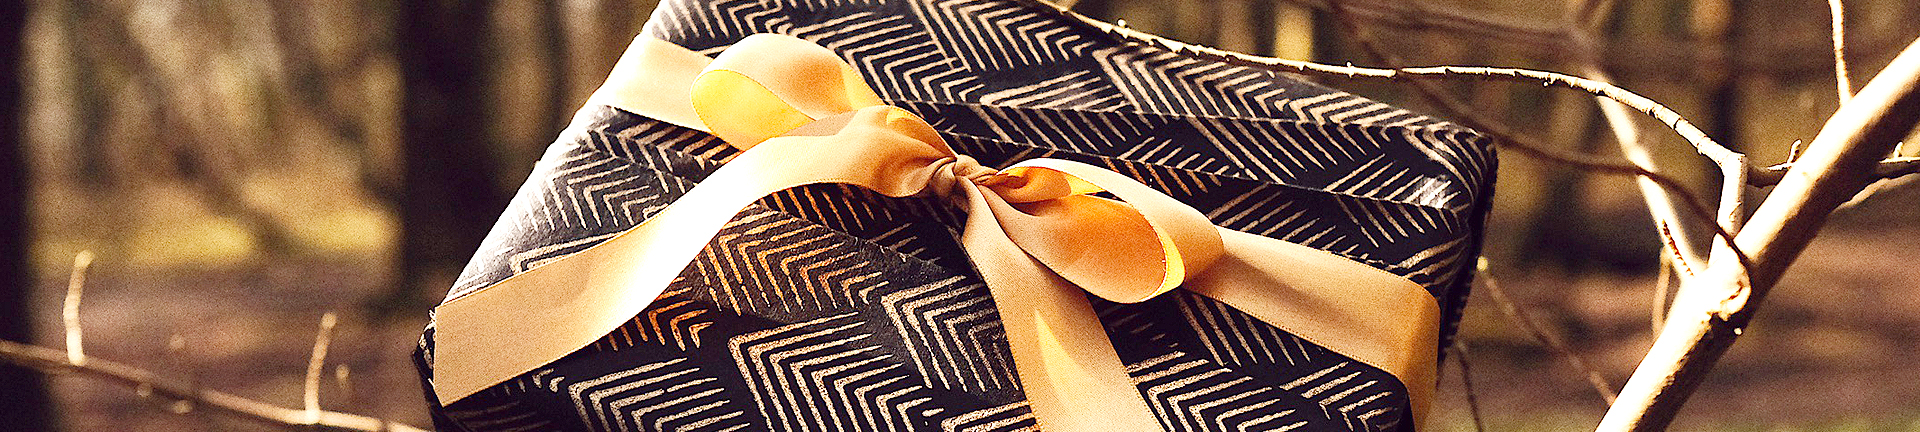 Gold and white gifts professionally wrapped in environmentally friendly premium wrapping paper